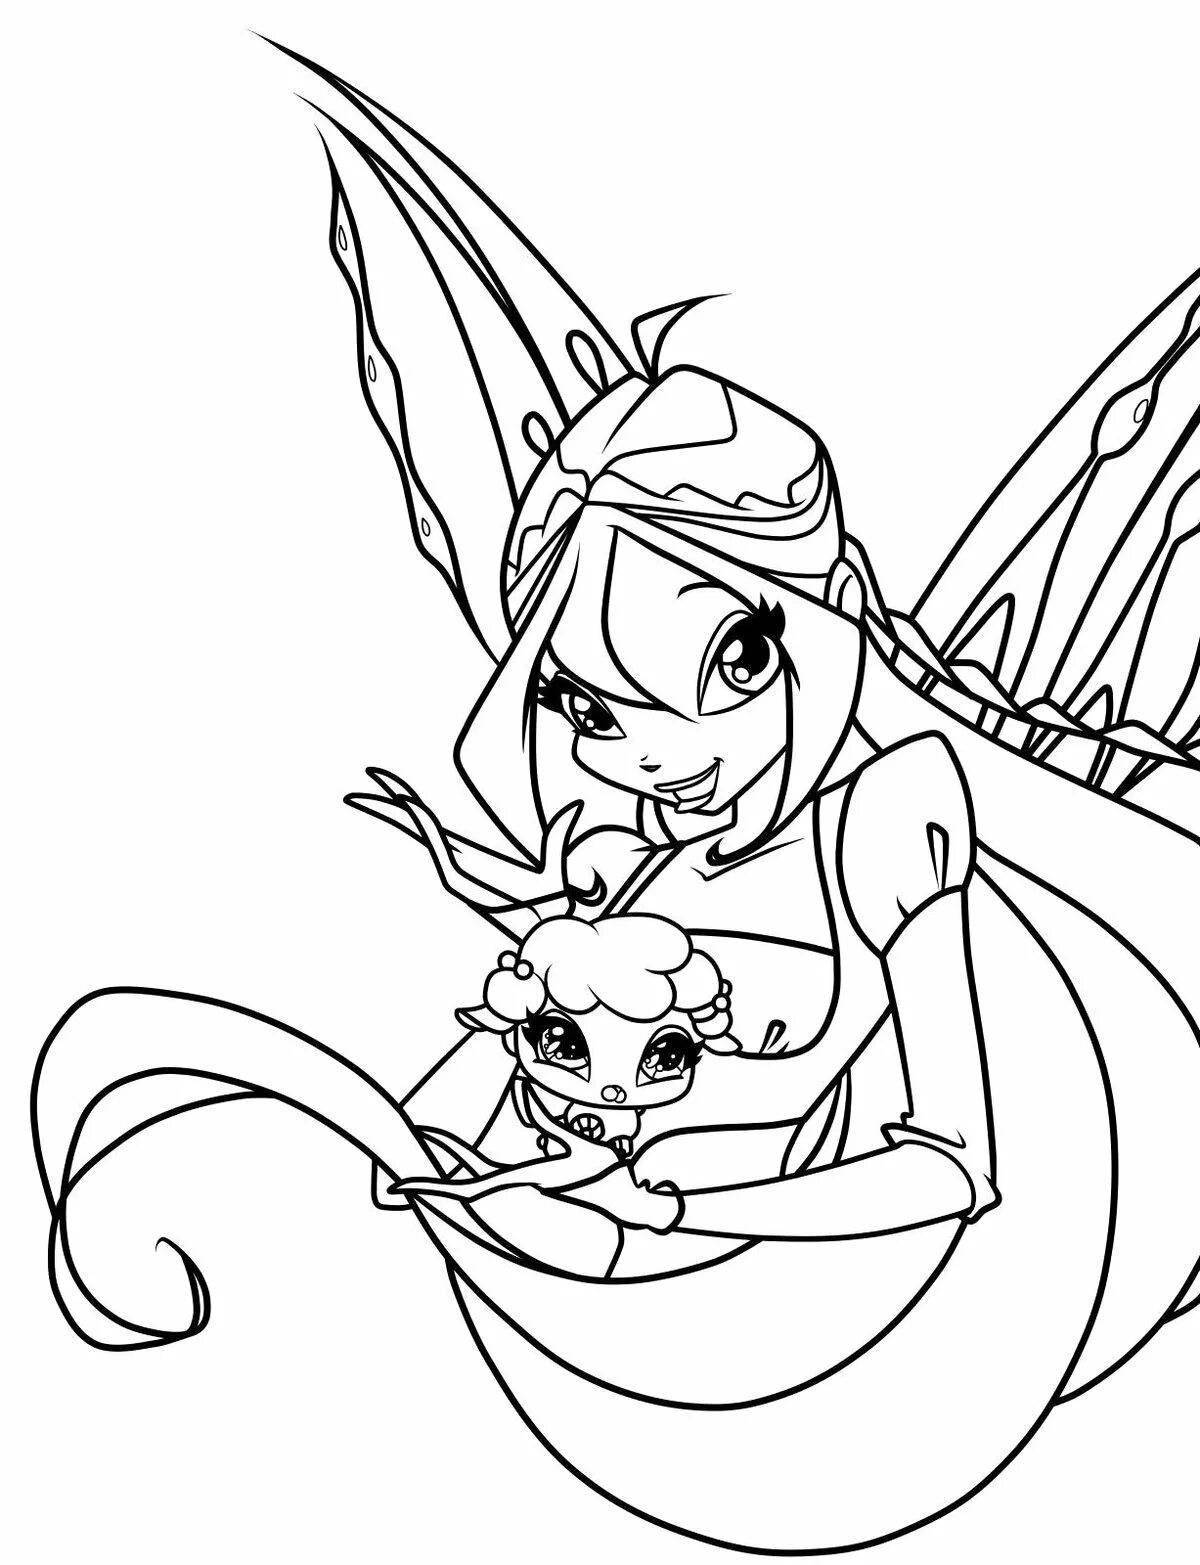 Colorful winx pet coloring page